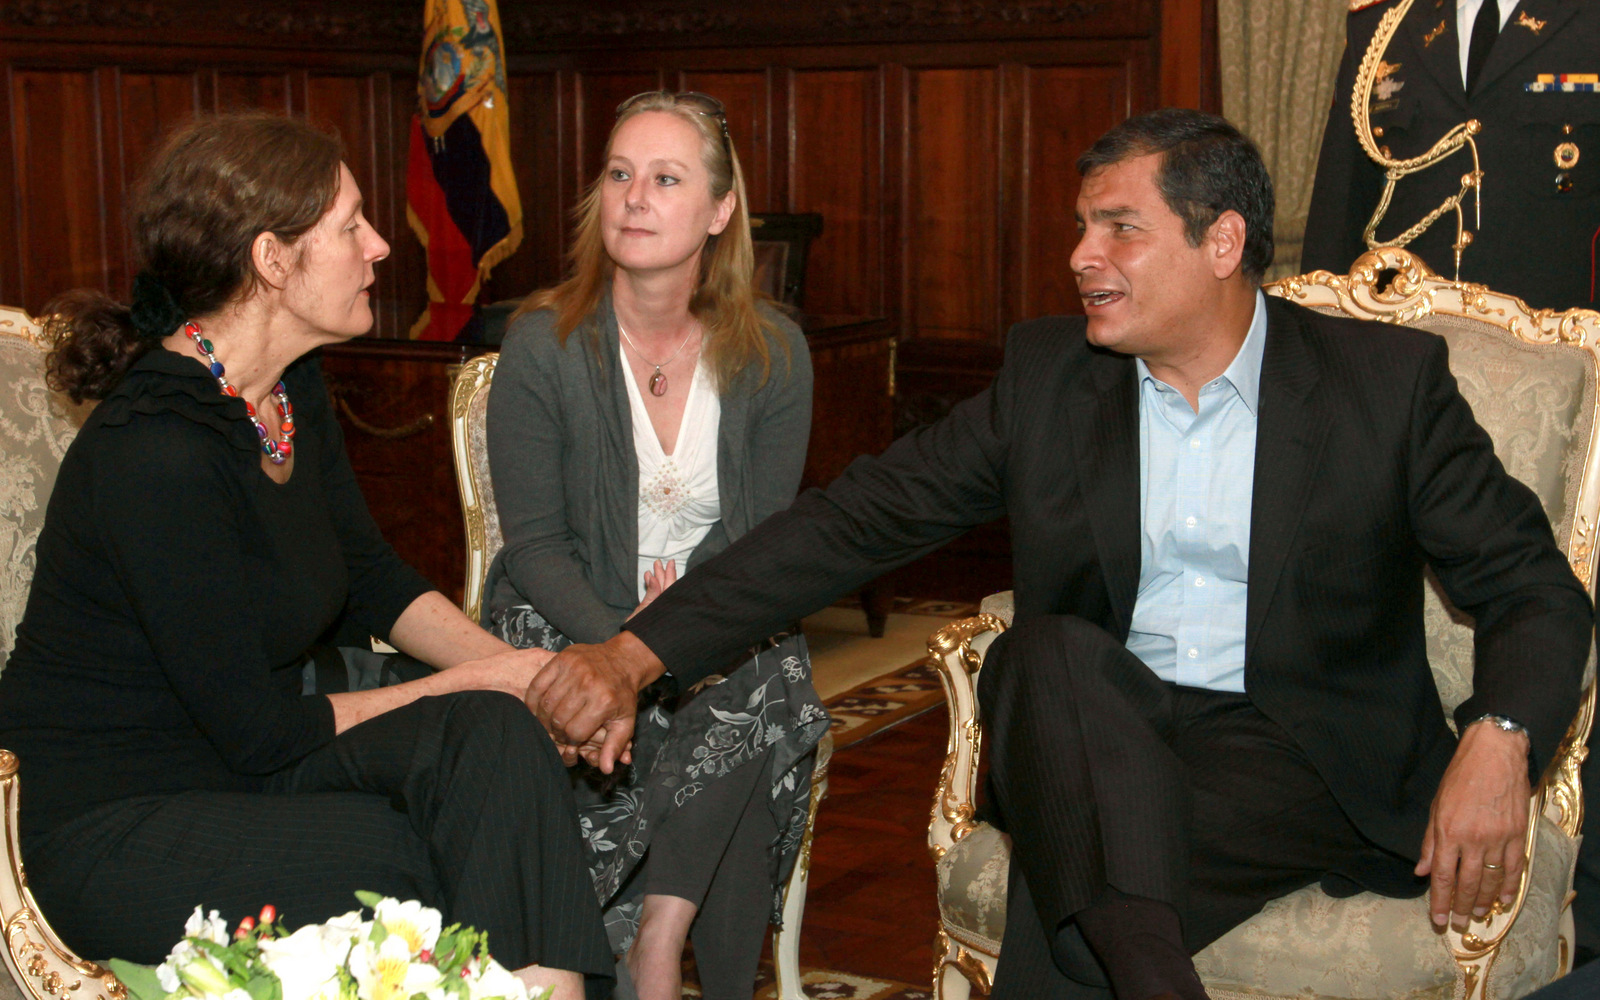 Ecuador's President Rafael Correa holds the hands of Christine Assange, the mother of WikiLeaks founder Julian Assange, during their meeting in Quito, Ecuador, Wednesday, Aug. 1, 2012. (AP/Martin Jaramillo)